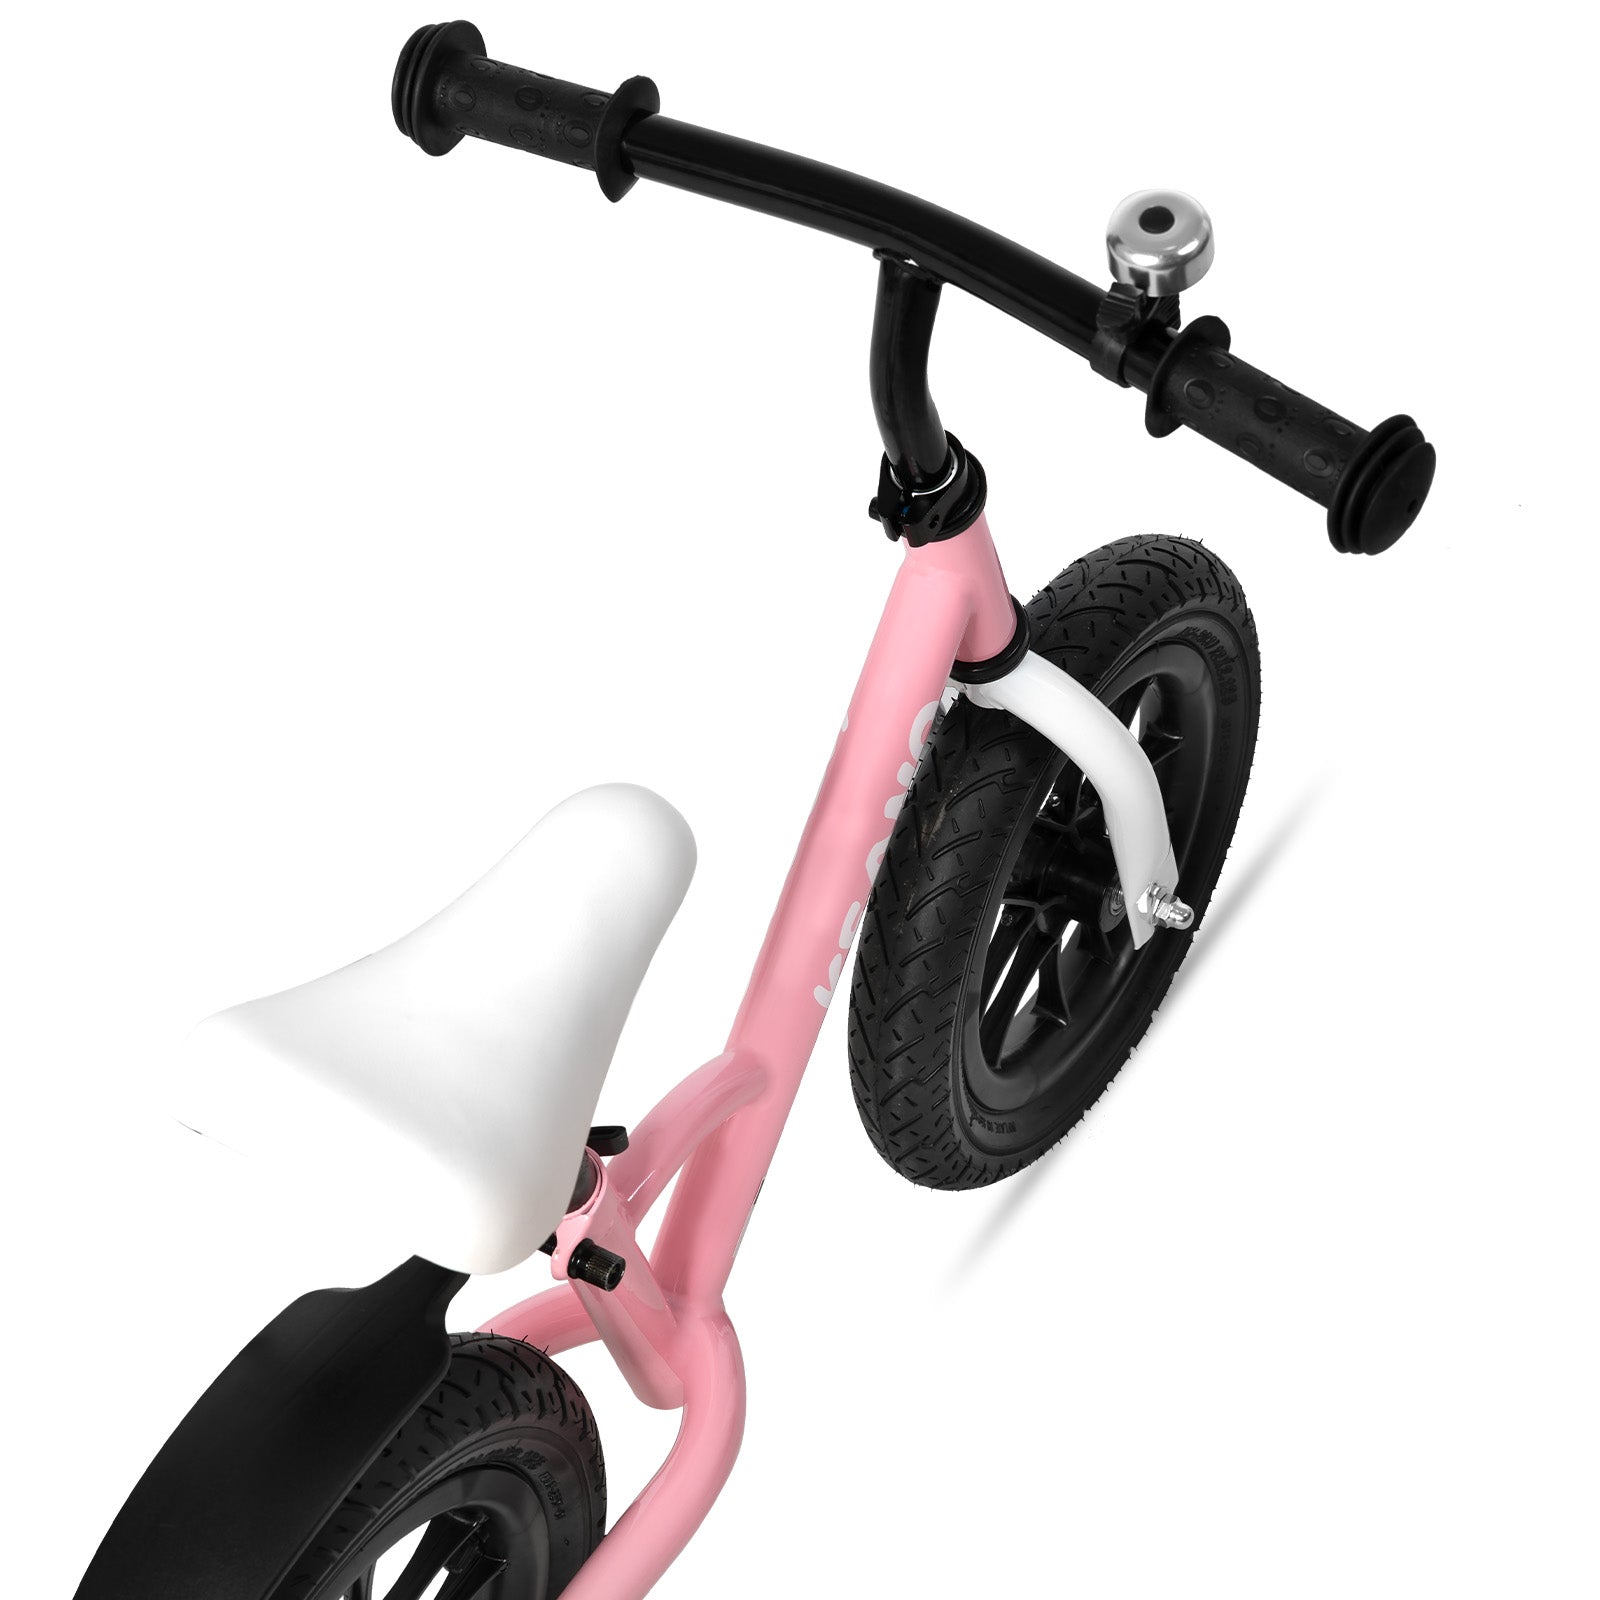 JOYSTAR 10/12 Toddler Balance Bike for Girls & Boys, Ages 18 Months to 5  Years